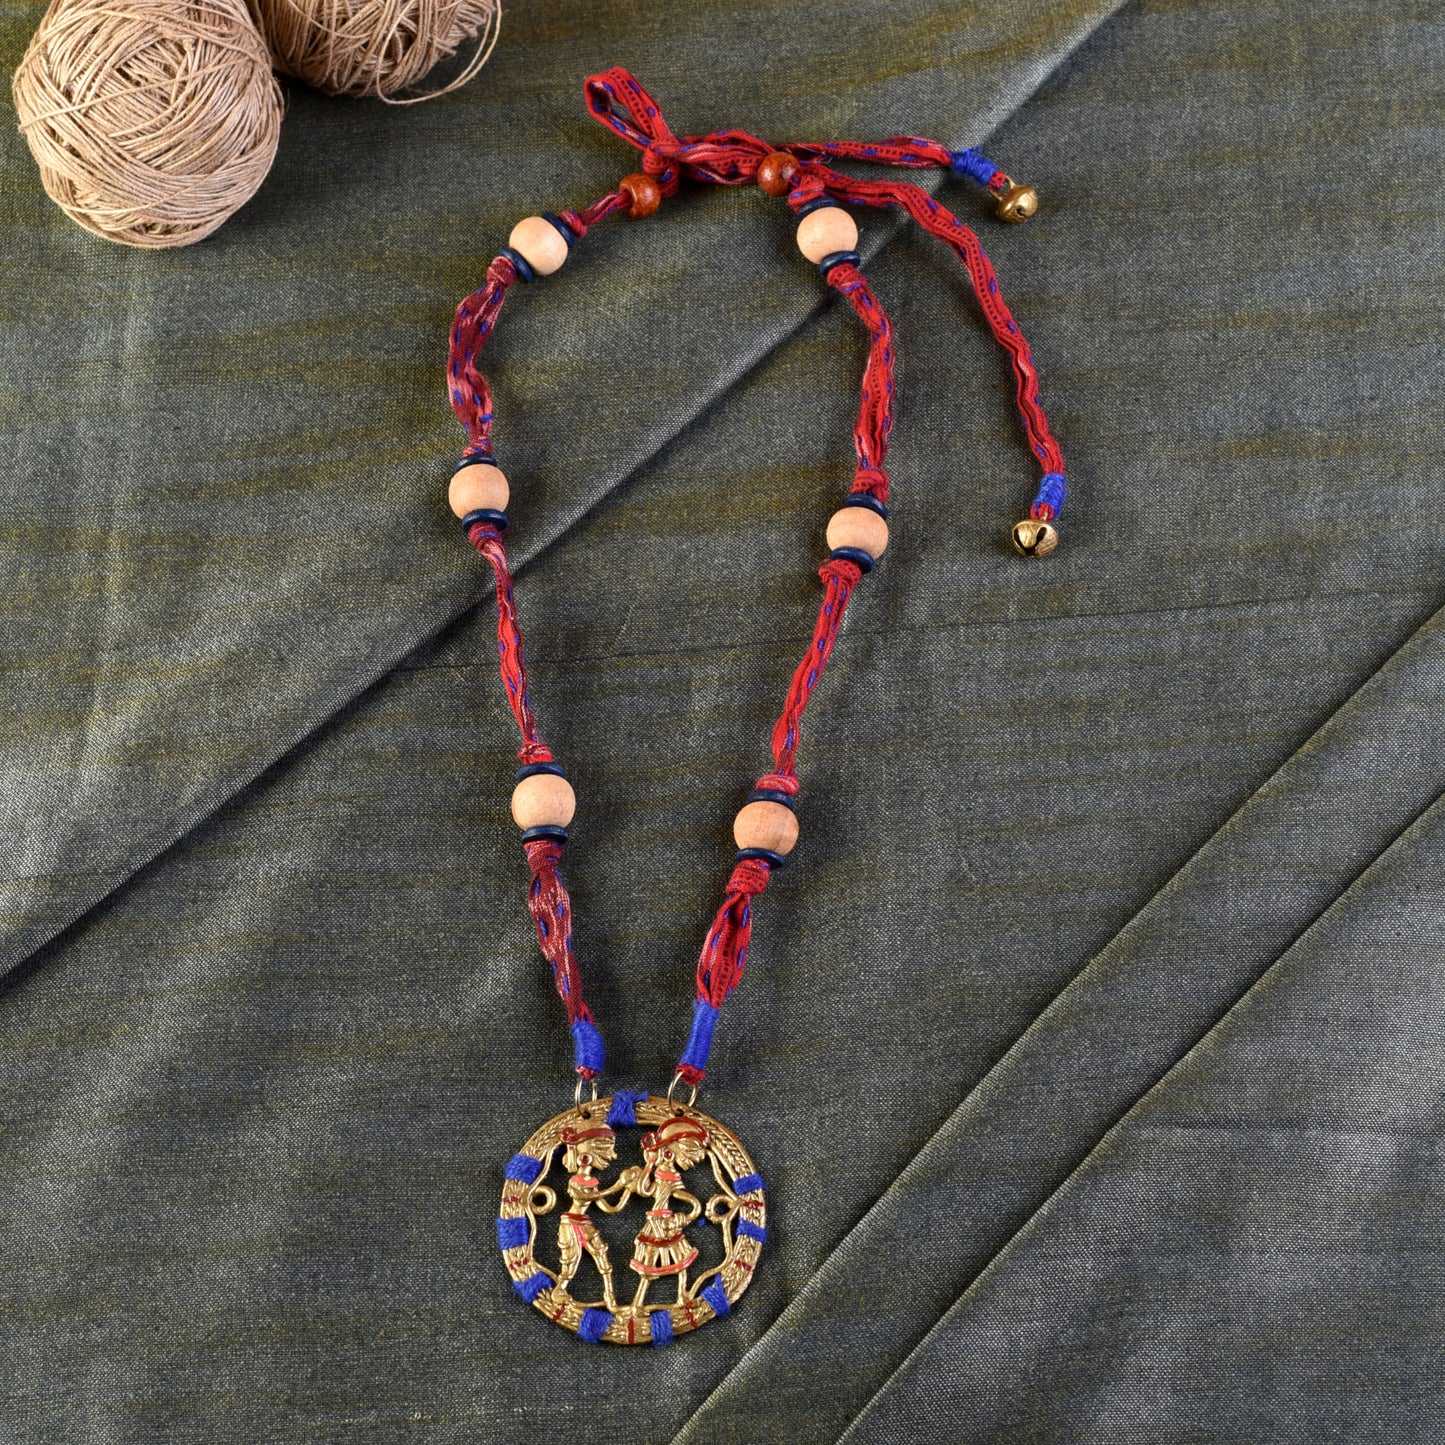 The Tribal Circle Handcrafted Dokra Necklace